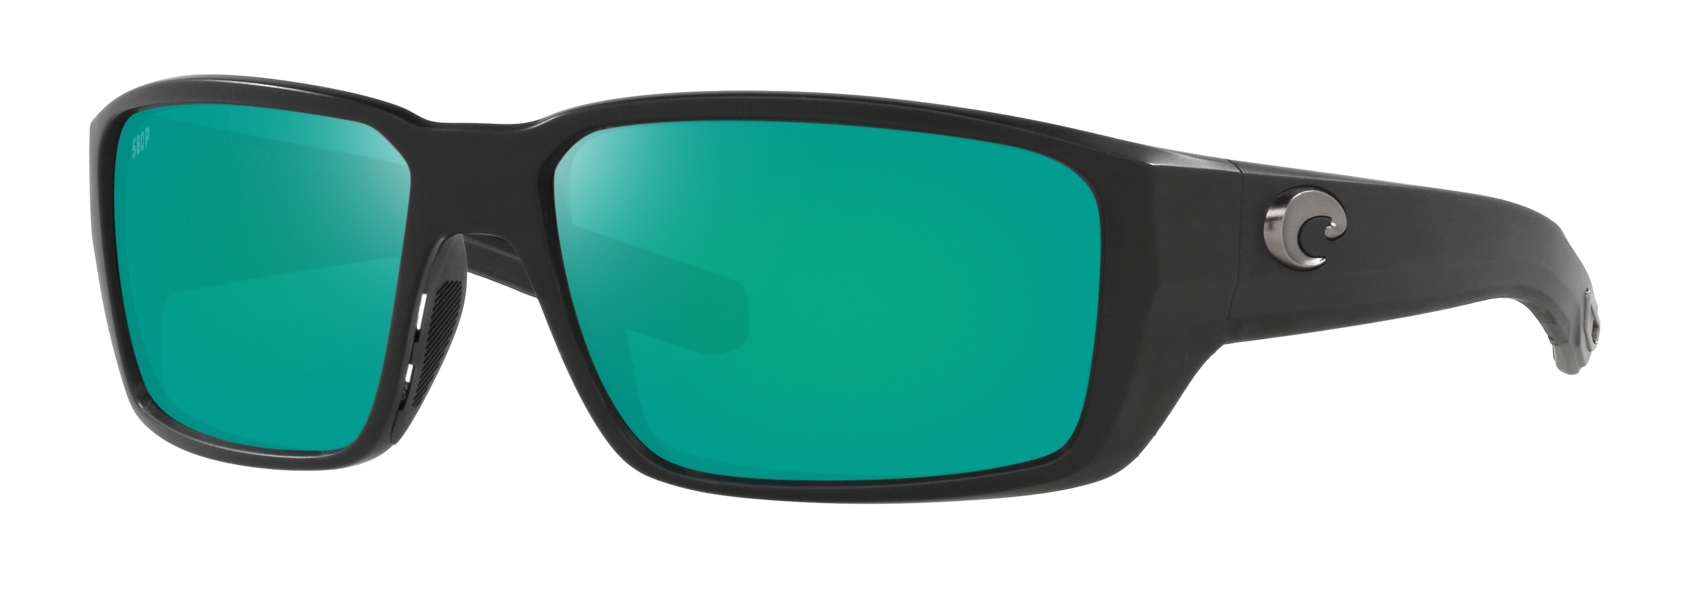 Costa Fantail PRO sunglasses in matte black with green mirror 580g lenses.